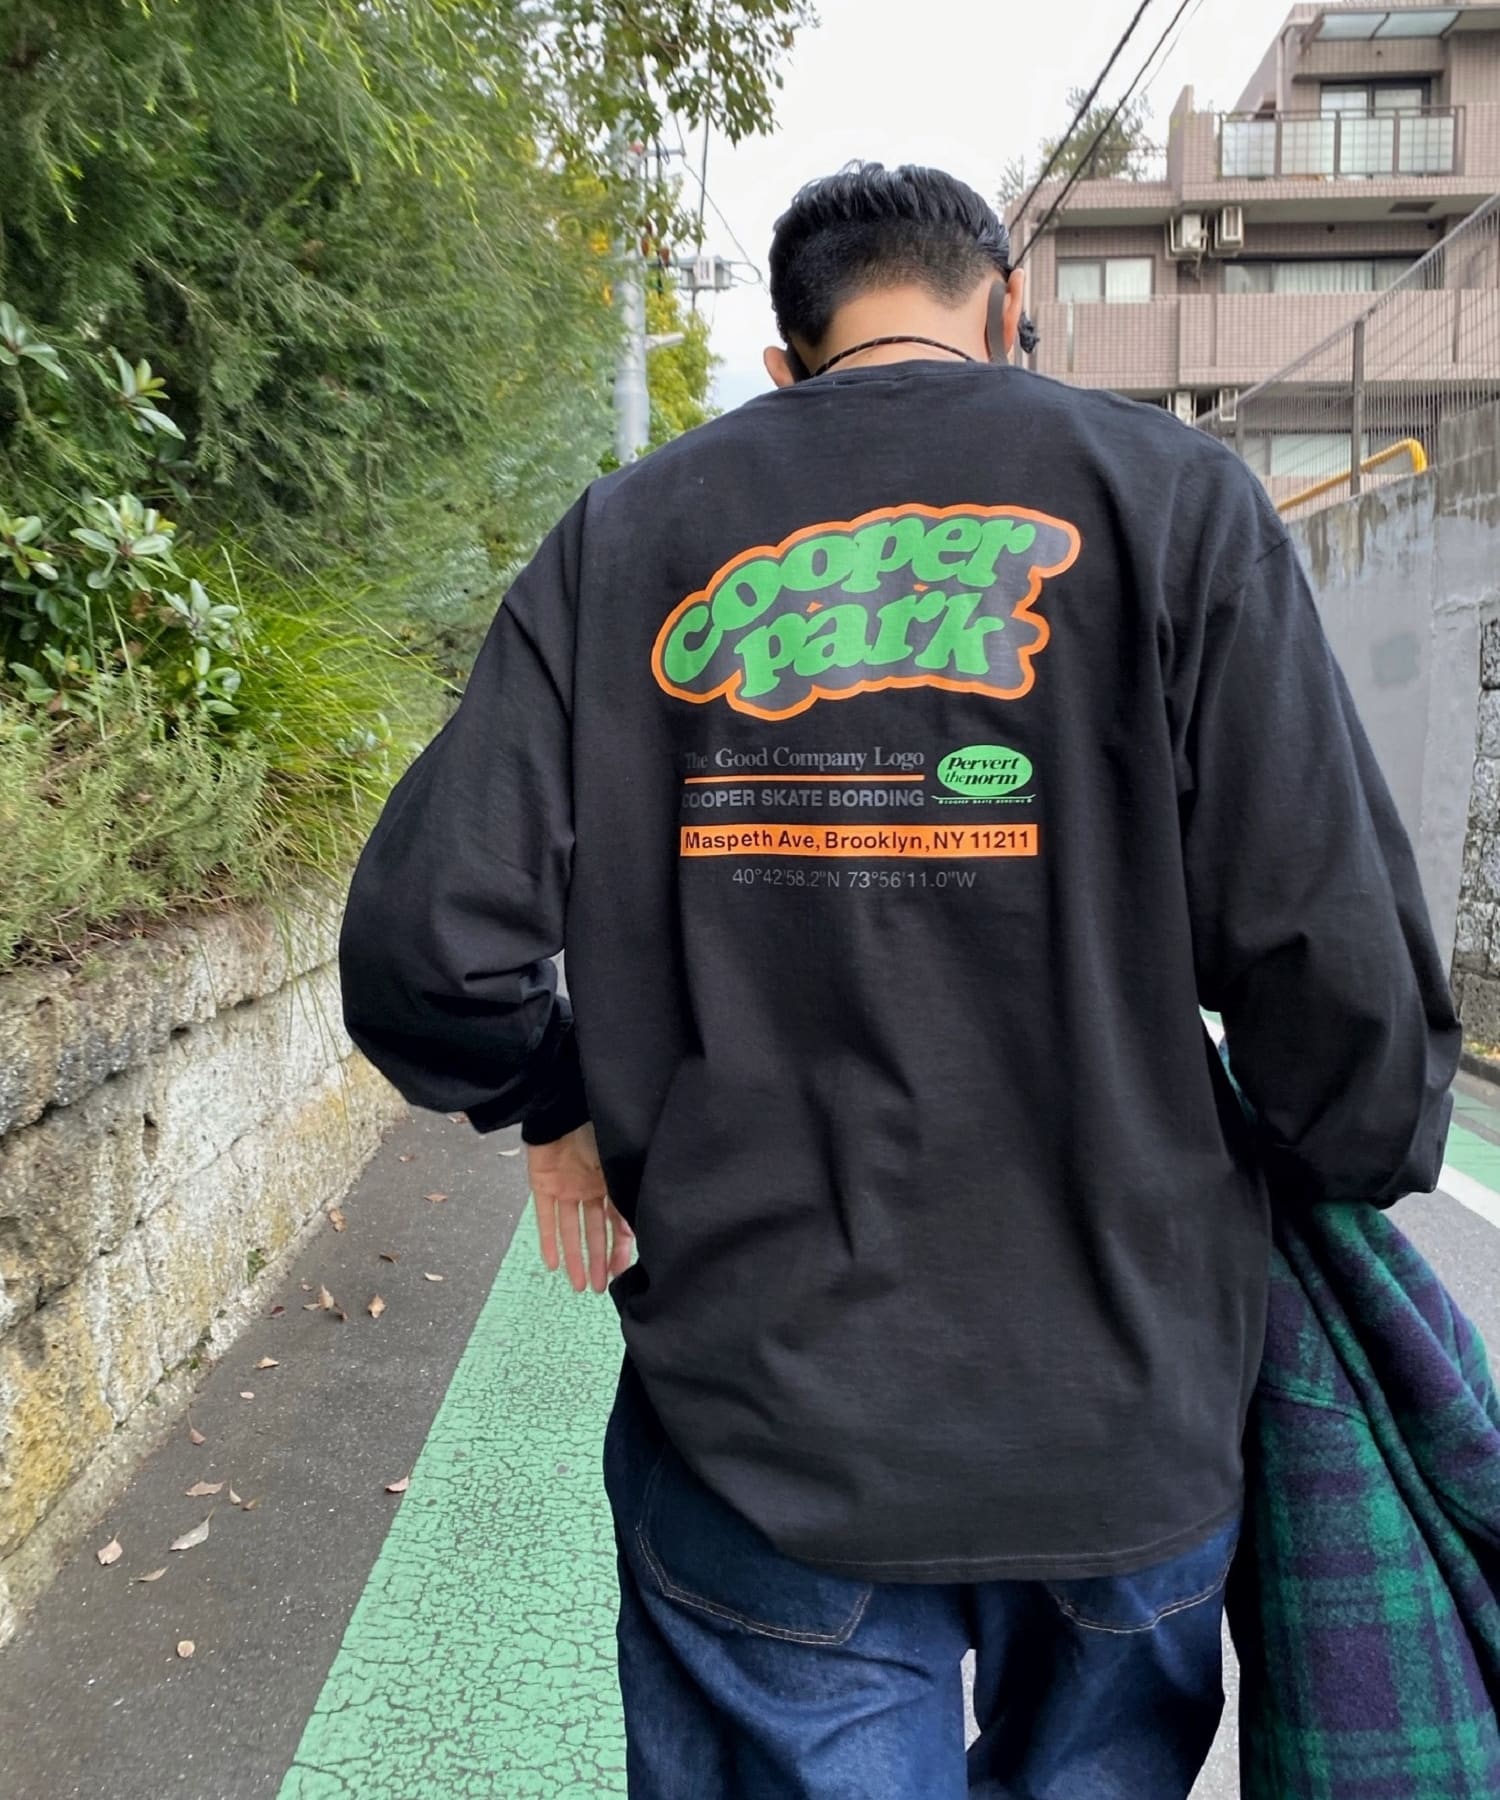 WHO’S WHO gallery(フーズフーギャラリー) COOPERPARK ロンTEE